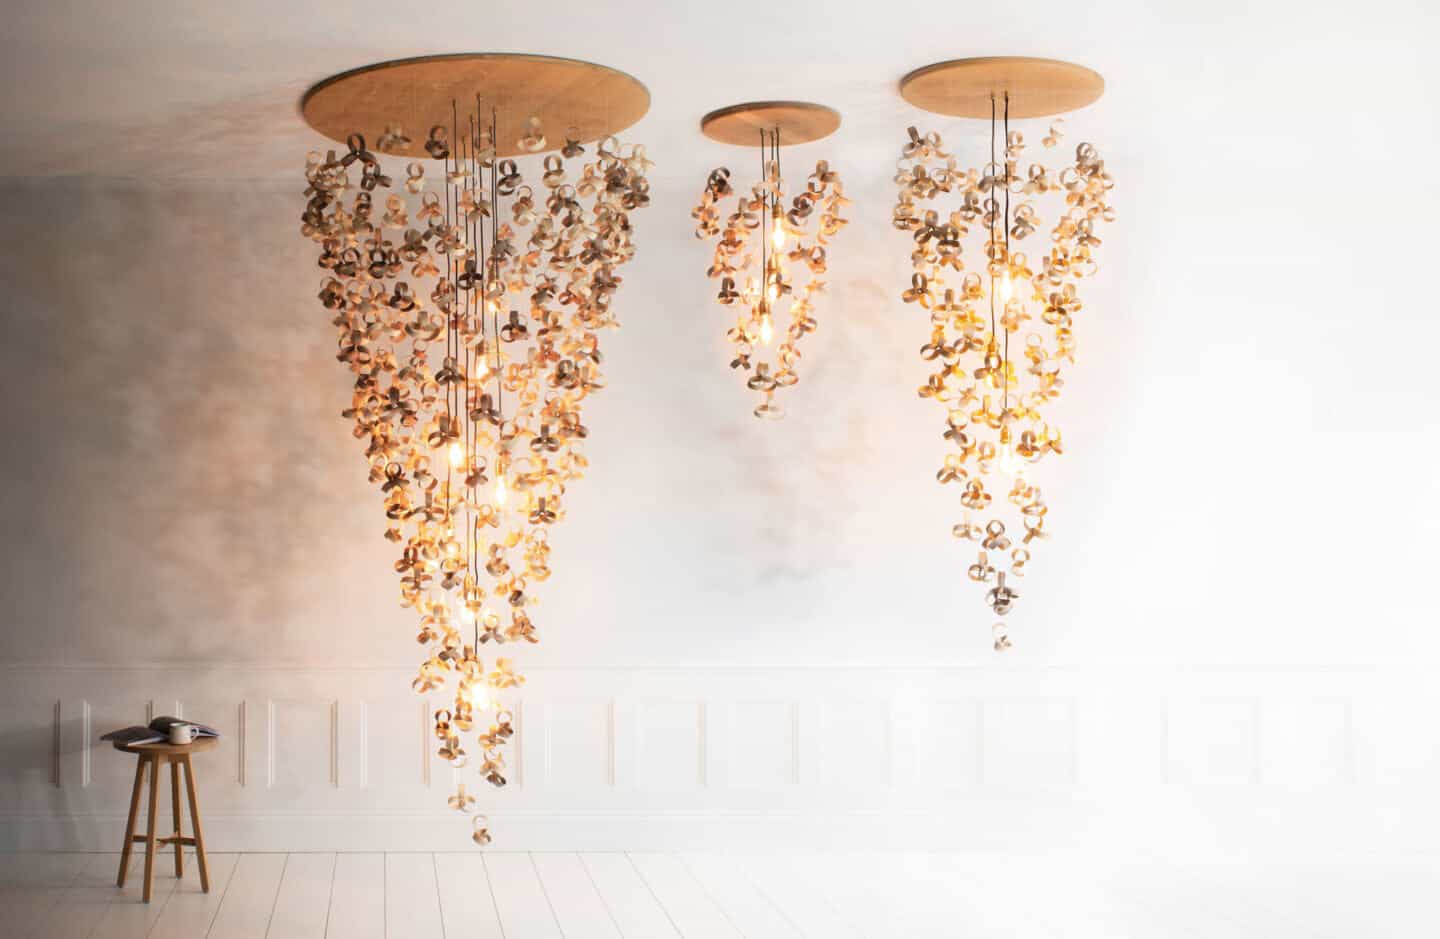 Three wooden chandeliers in varying sizes hang from the ceiling